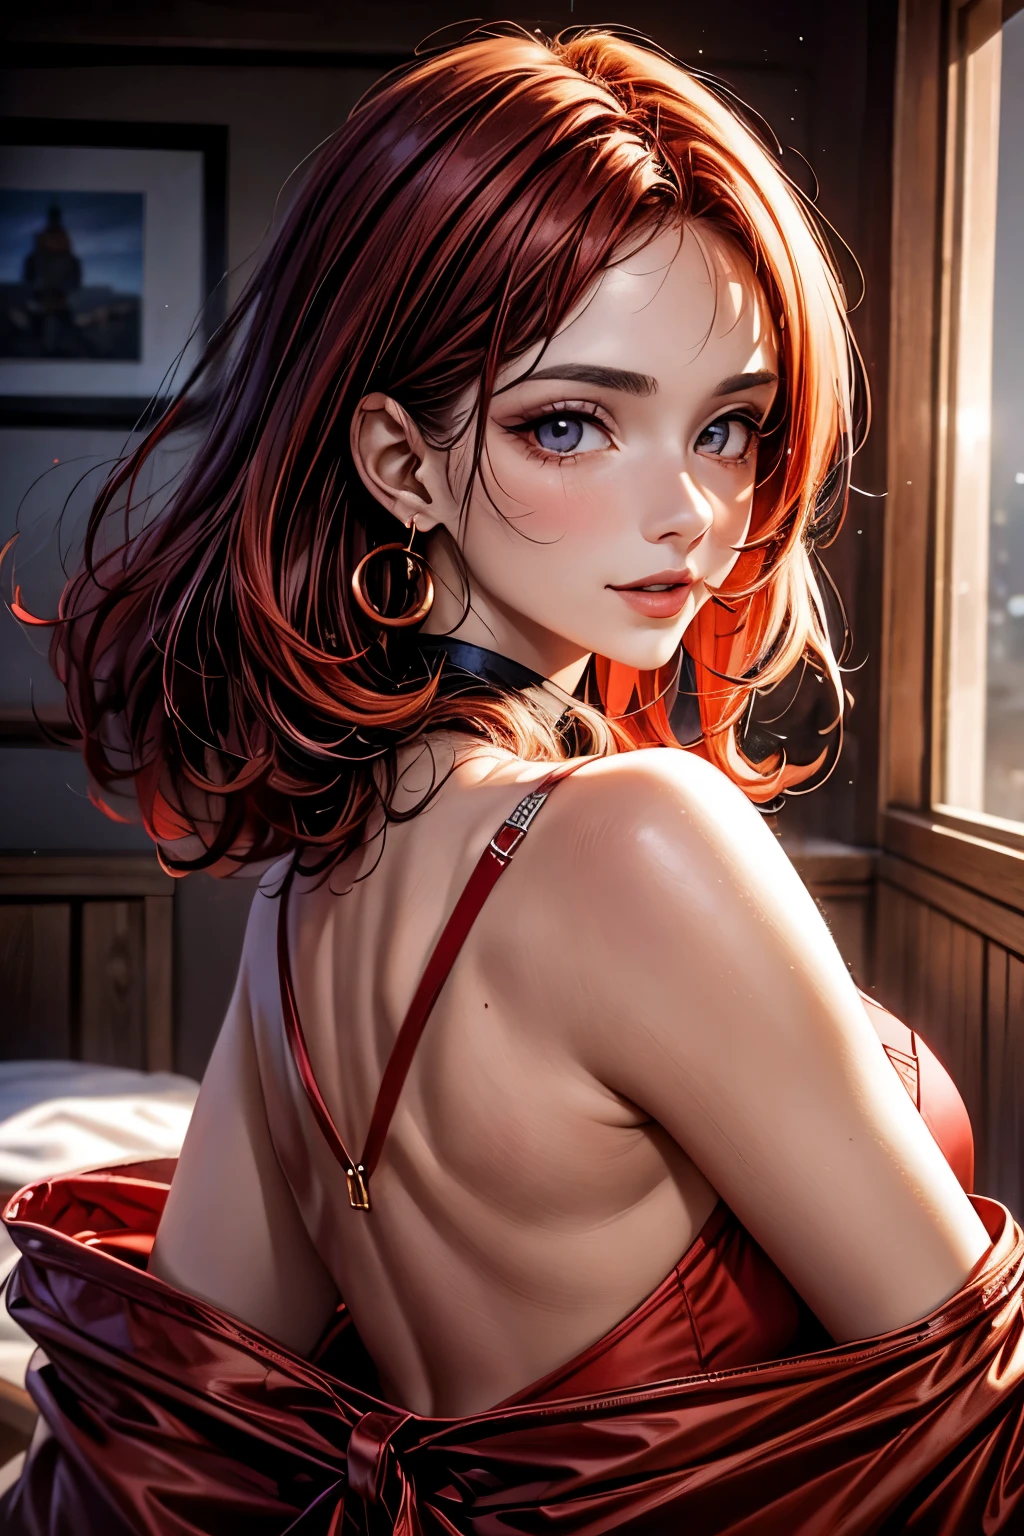 Masterpiece, Best Quality, 1 girl, Alone, 23 years, adult, Fiery red hair, messy hair, asymmetrical hair, passion, Very long hair, ruby eyes, big breasts, toned, 185cm, White skin, fangs, arrogant smile, red and gold robe, magnate, look at the neck,